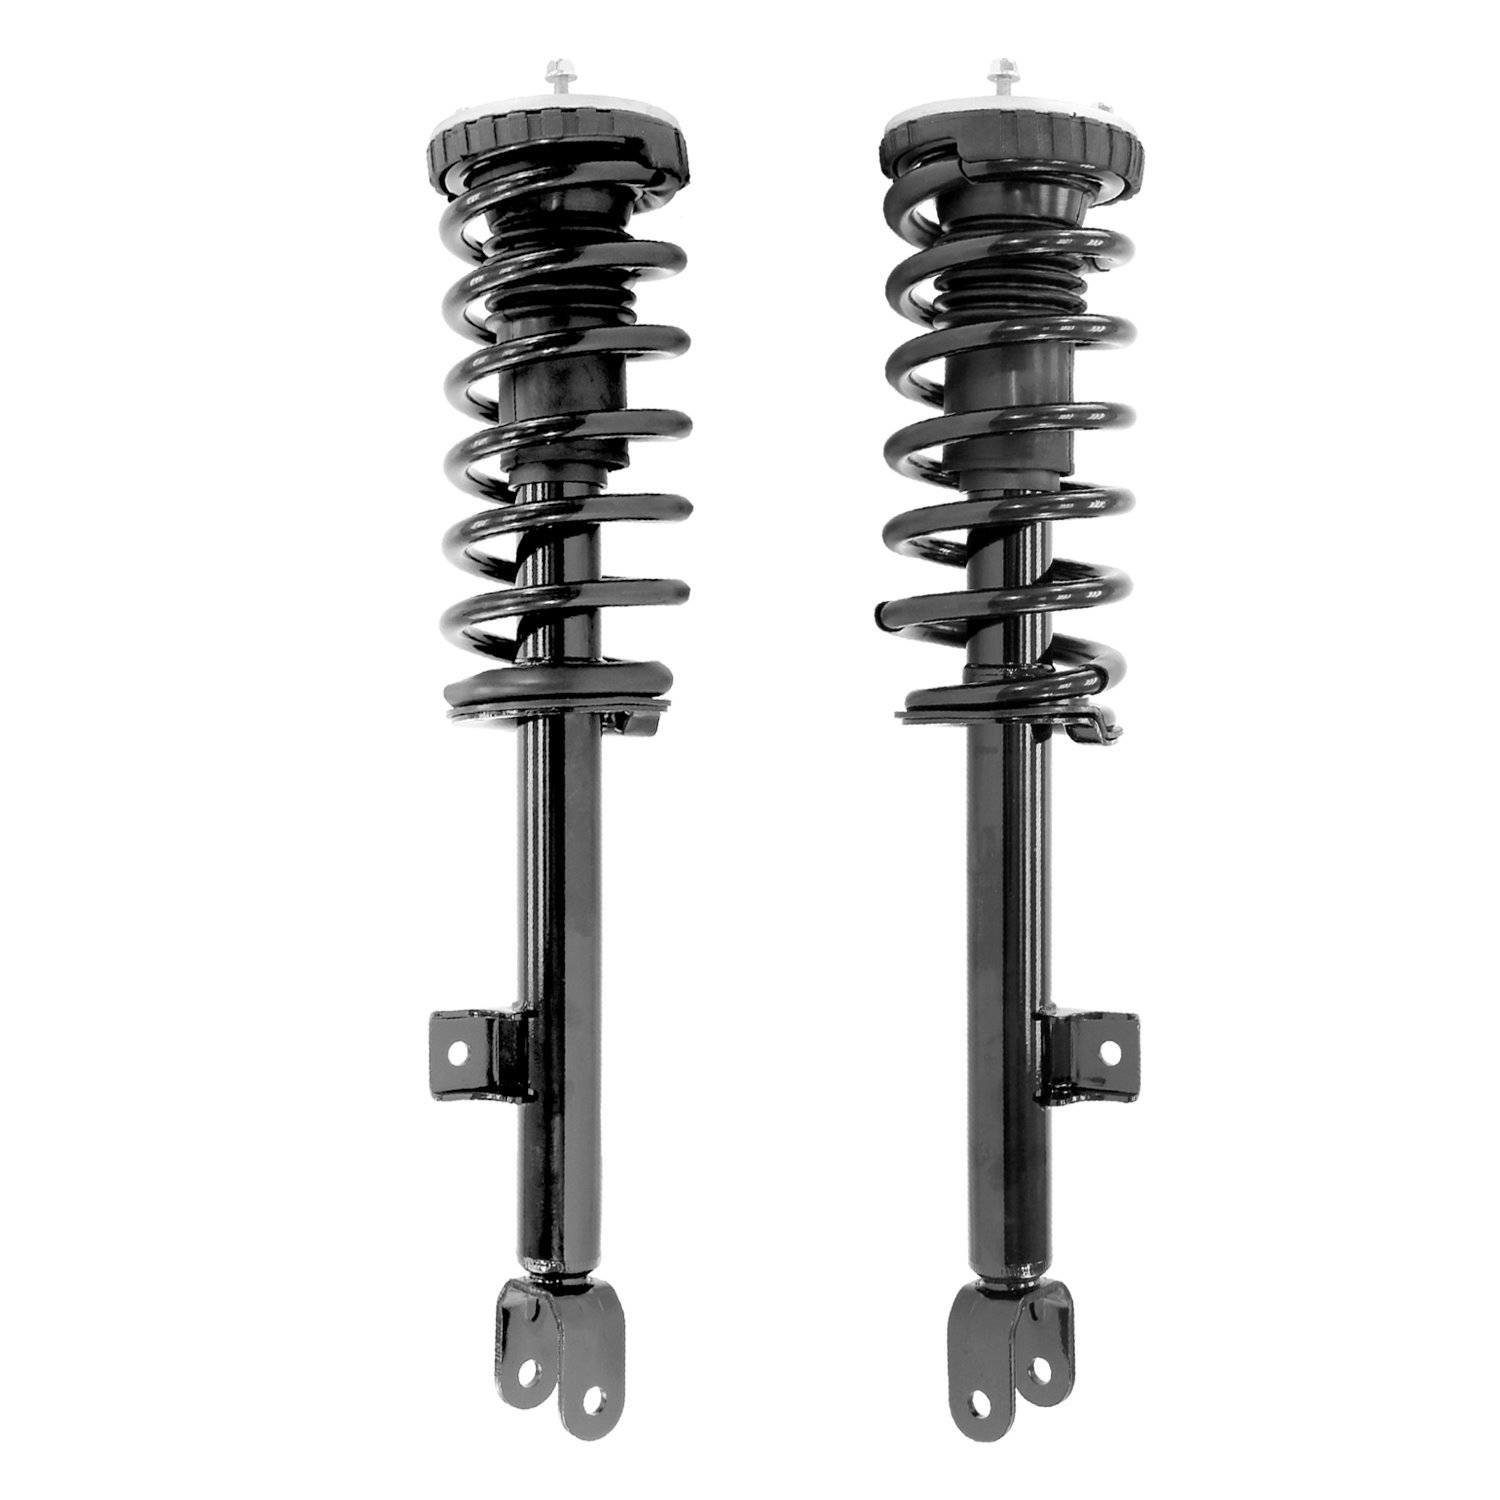 2-13593-13594-001 Front Suspension Strut & Coil Spring Assemby Set Fits Select Genesis G80, Hyundai Genesis